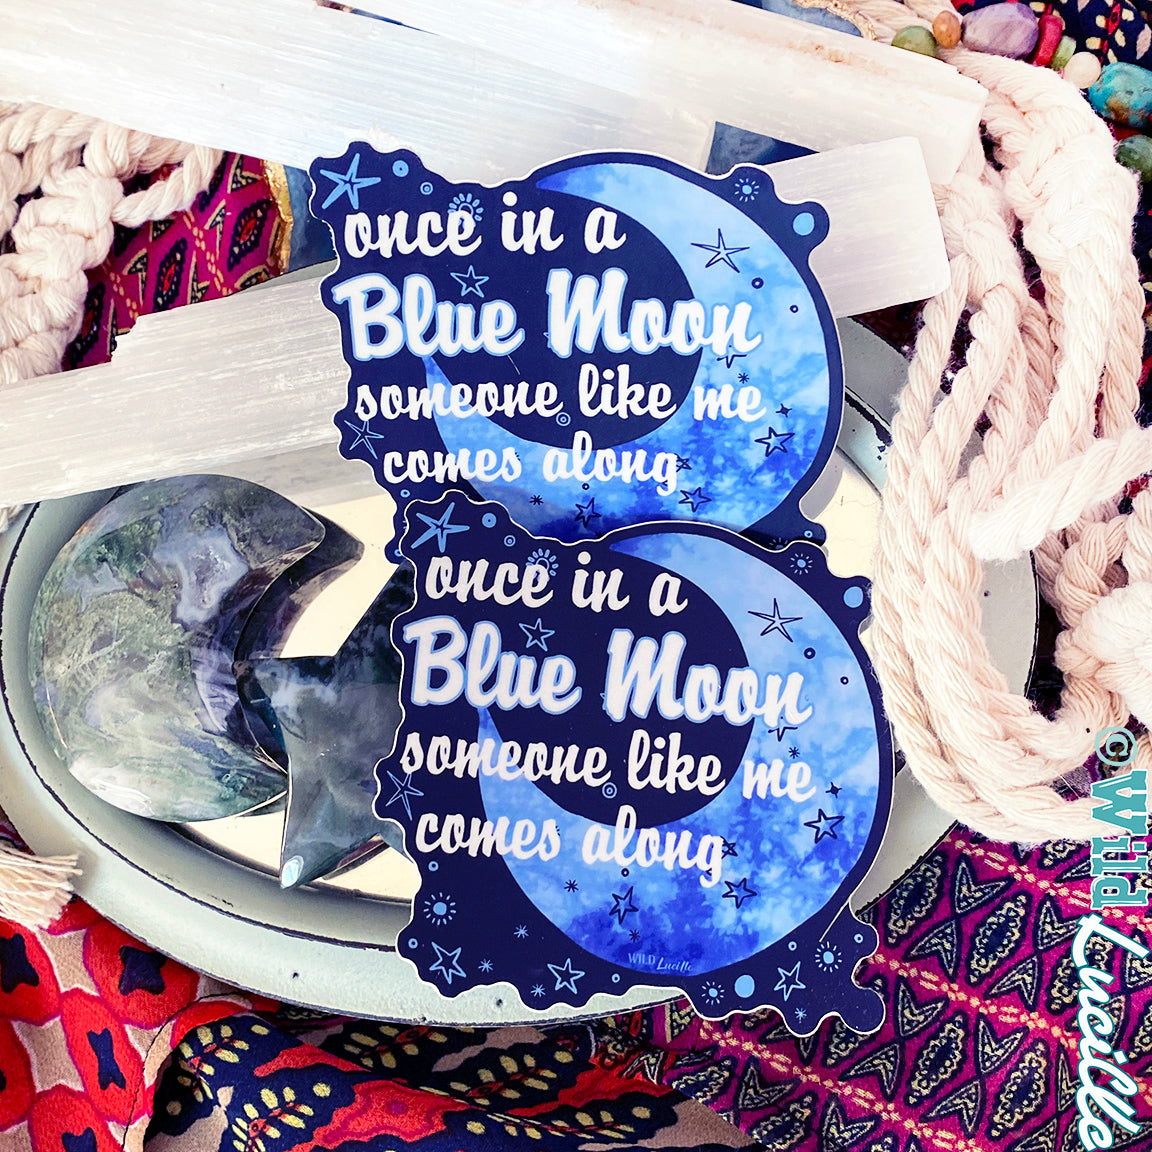 Once in a Blue Moon Someone Like Me Comes Along - Vinyl Sticker Decals